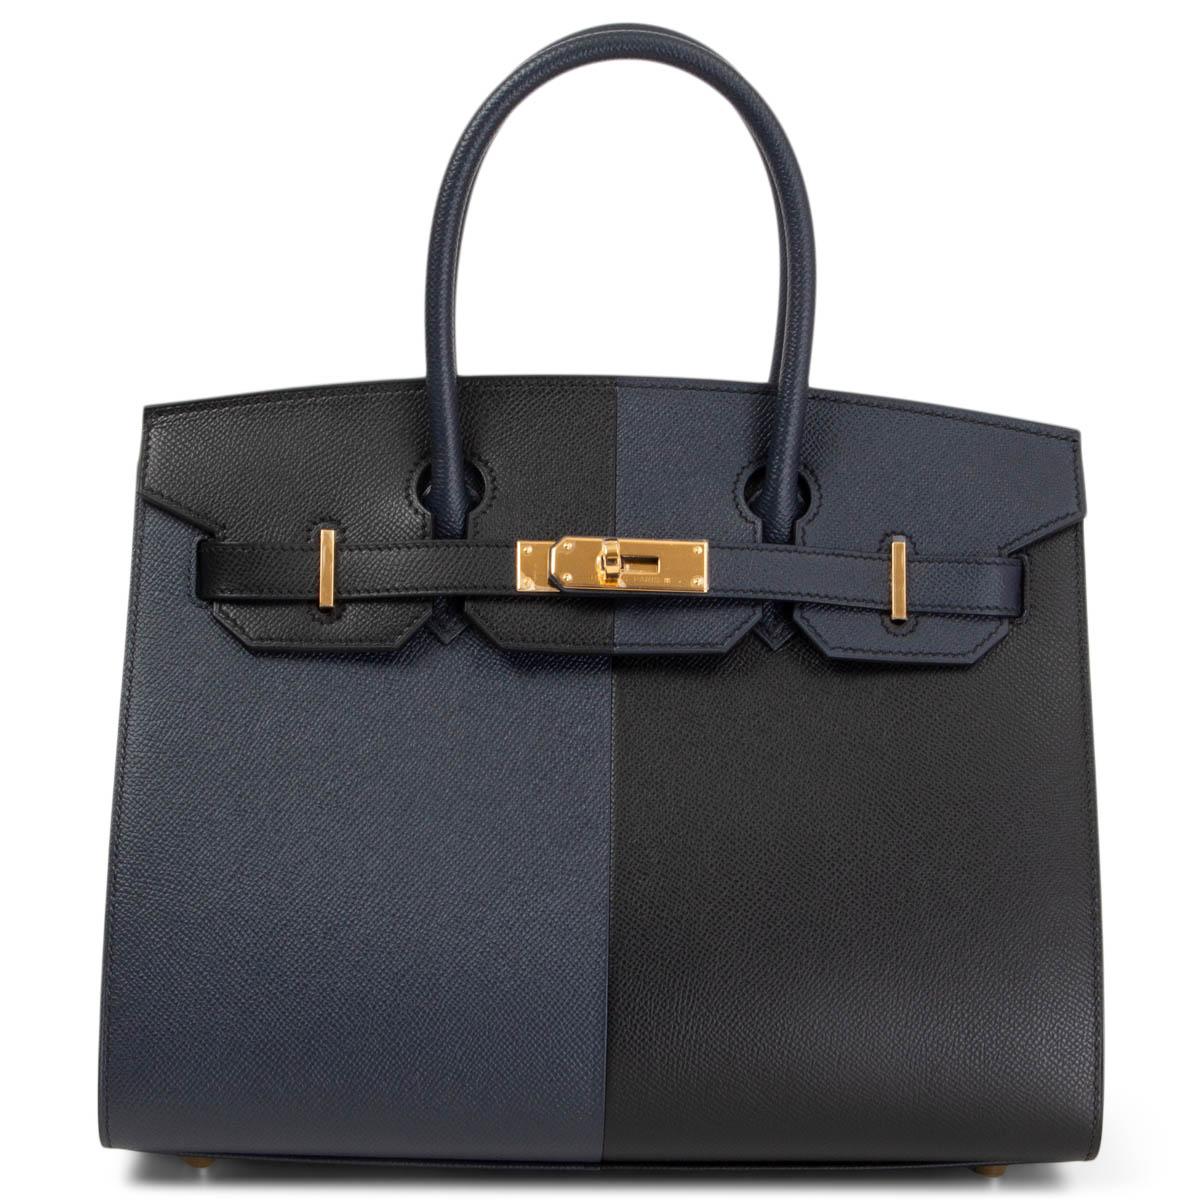 100% authentic Hermes 'Birkin 30 Sellier Casaque' bag in Bleu Indigo (blue) and Noir (black) Veau Epsom leather with gold-plated hardware. Limited to 18 pieces worldwide. Lined in Bleu Frida (medium blue) Chevre (goat skin) with an open pocket